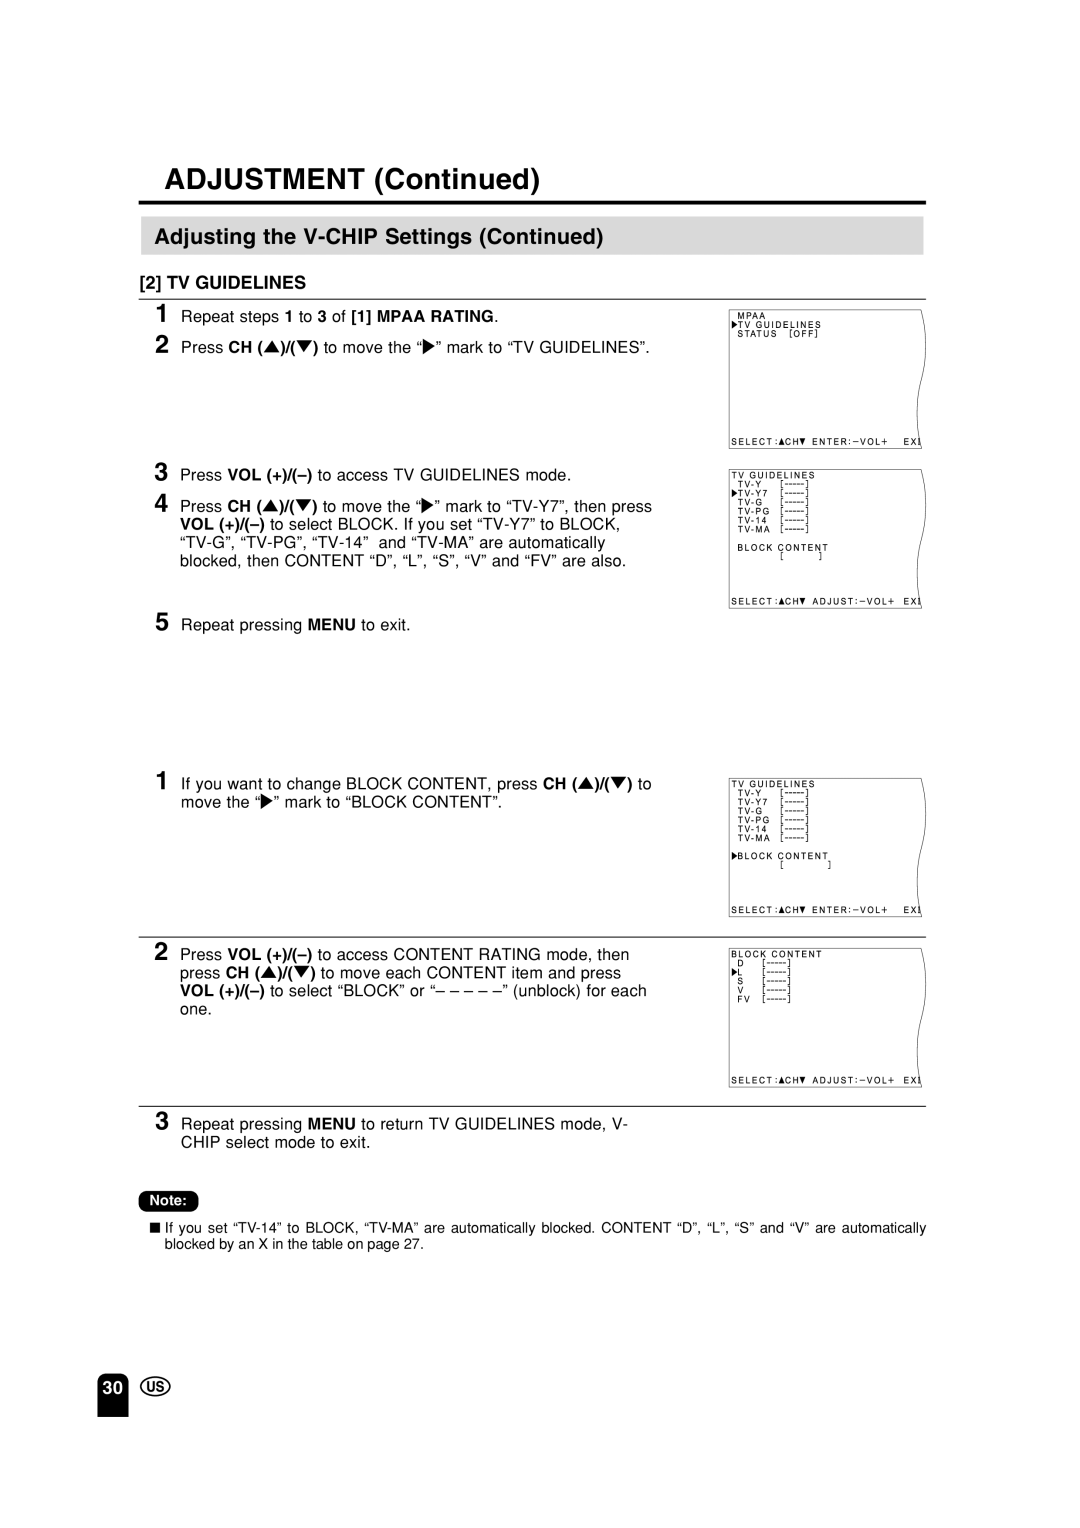 Sharp LC 15A2U operation manual ADJUSTMENT Continued, Adjusting the V-CHIP Settings Continued, Tv Guidelines 